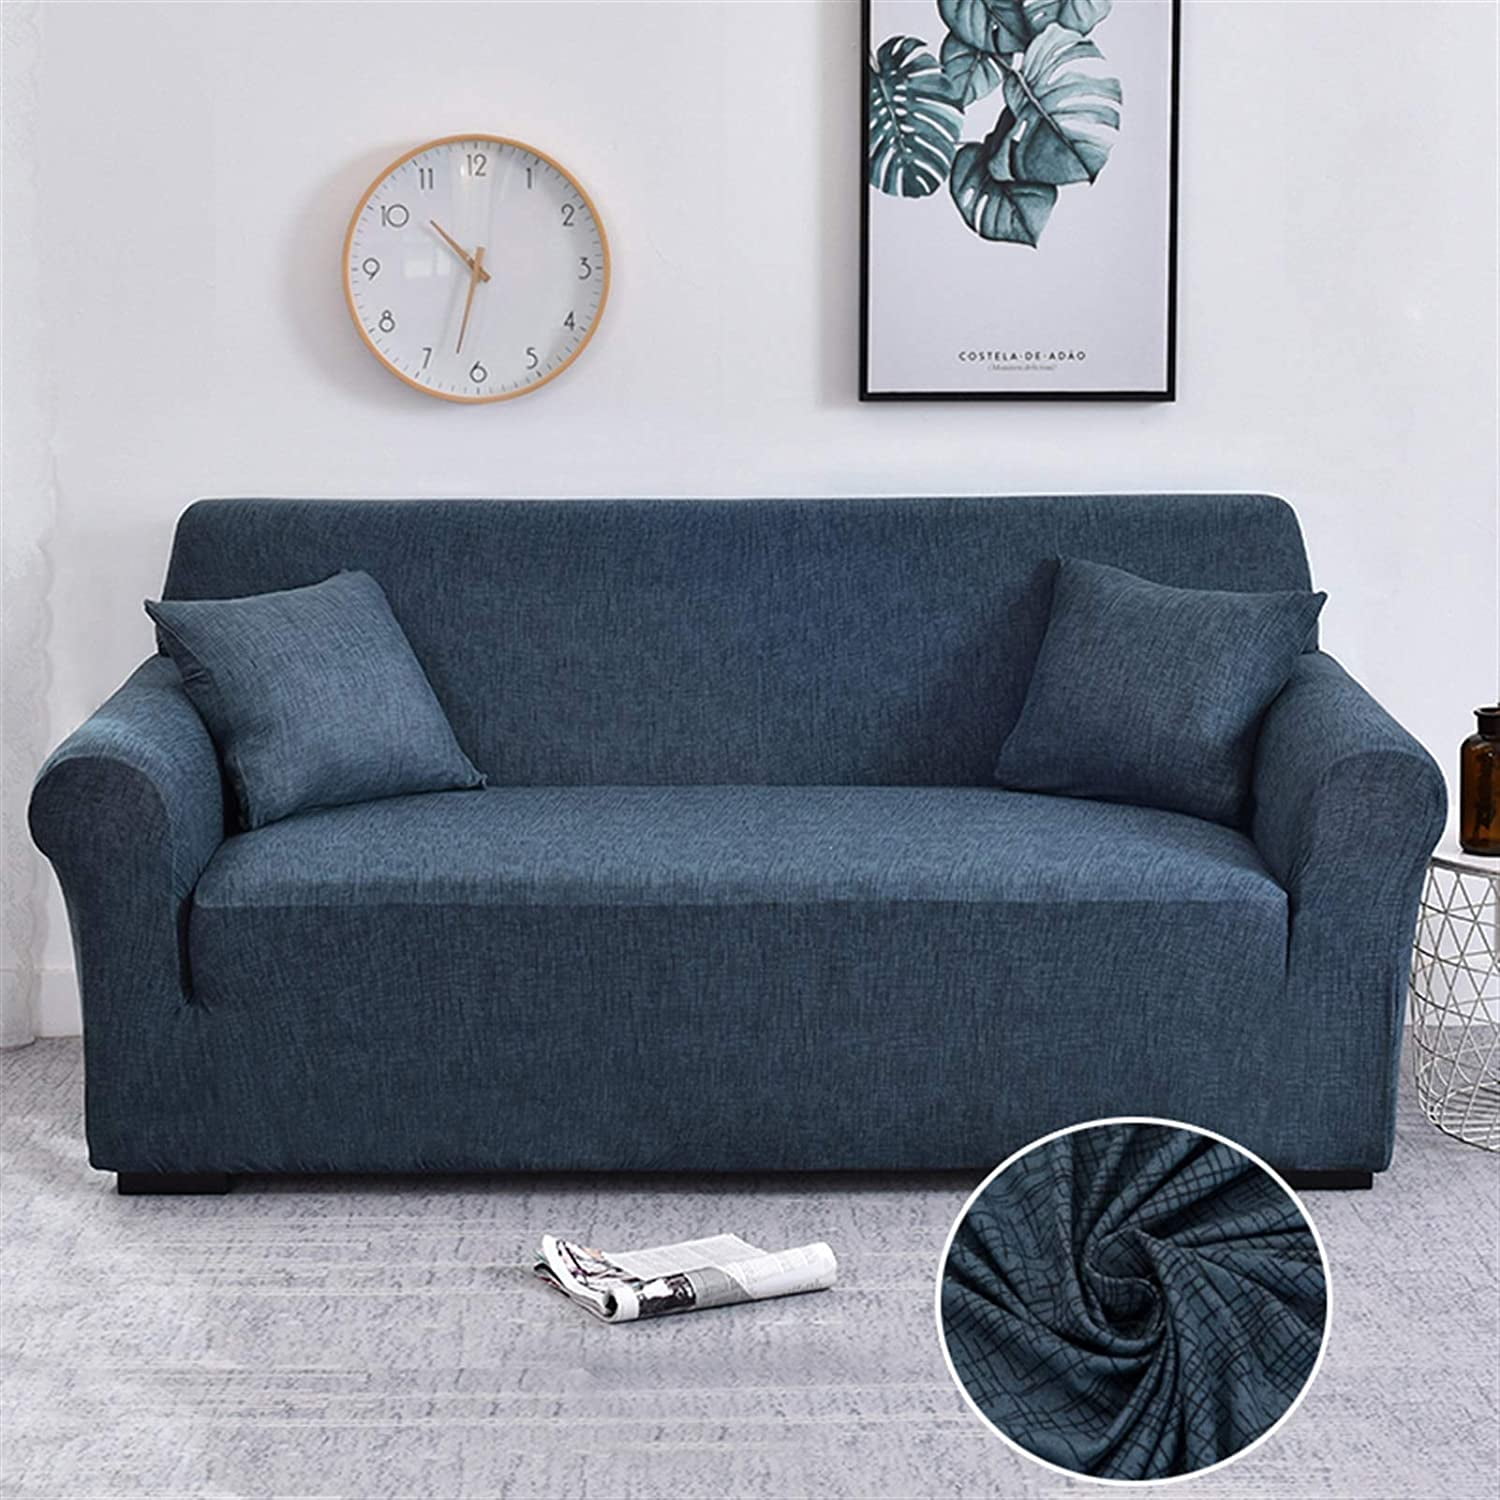 1/2/3 Seater Sofa Covers Slipcover Elastic Corner Stretch Protector Easy Instal 